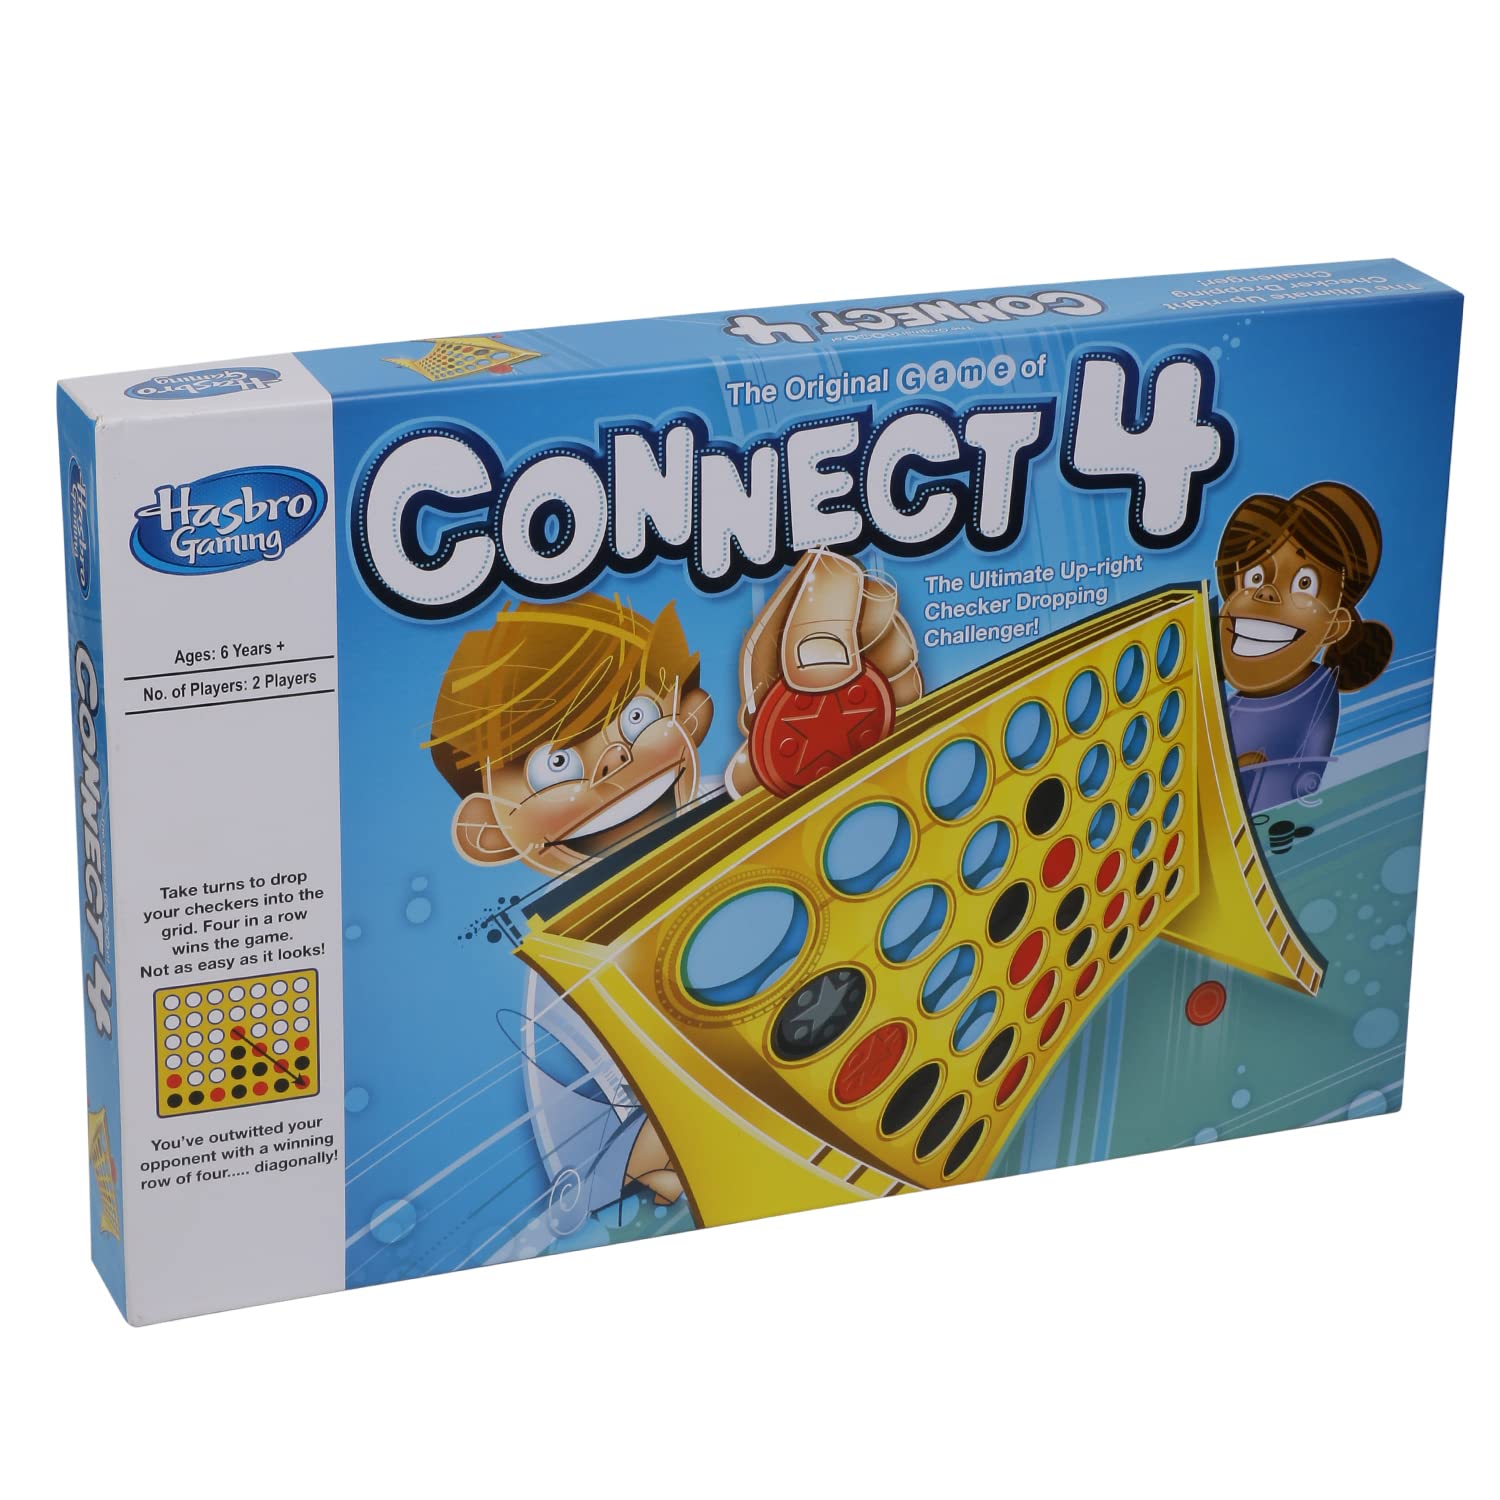 Hasbro Gaming The Classic Game of Connect 4